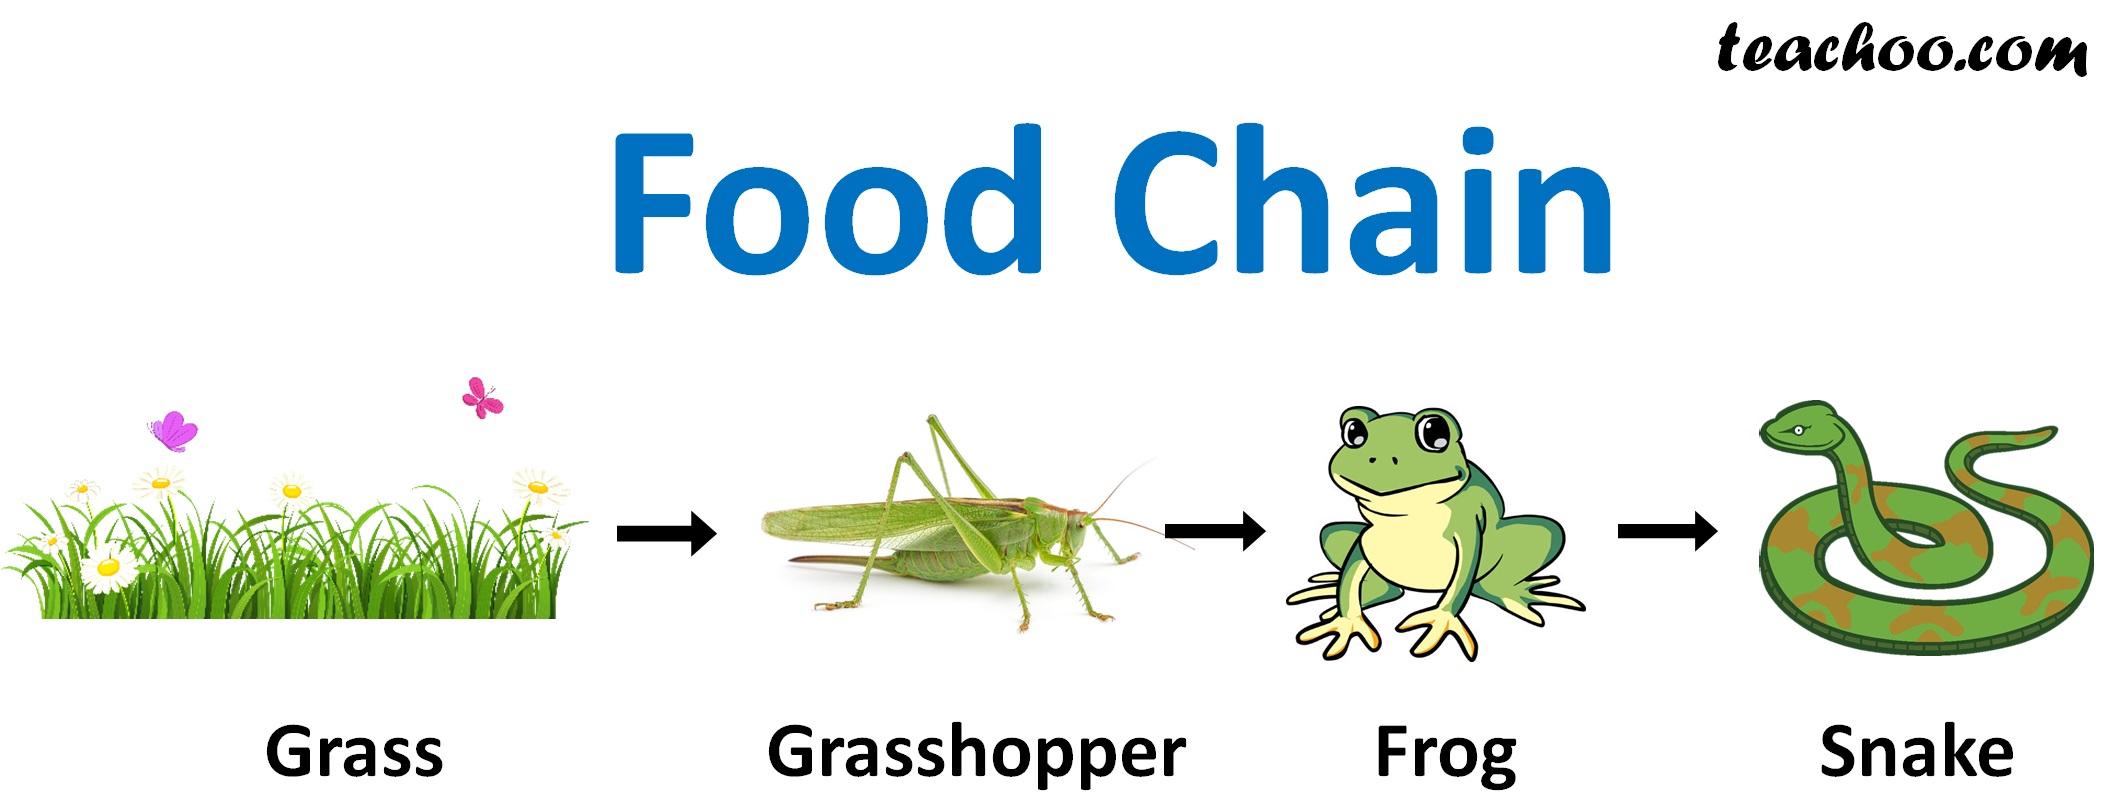 Give Two Examples Of Food Chain - Design Talk